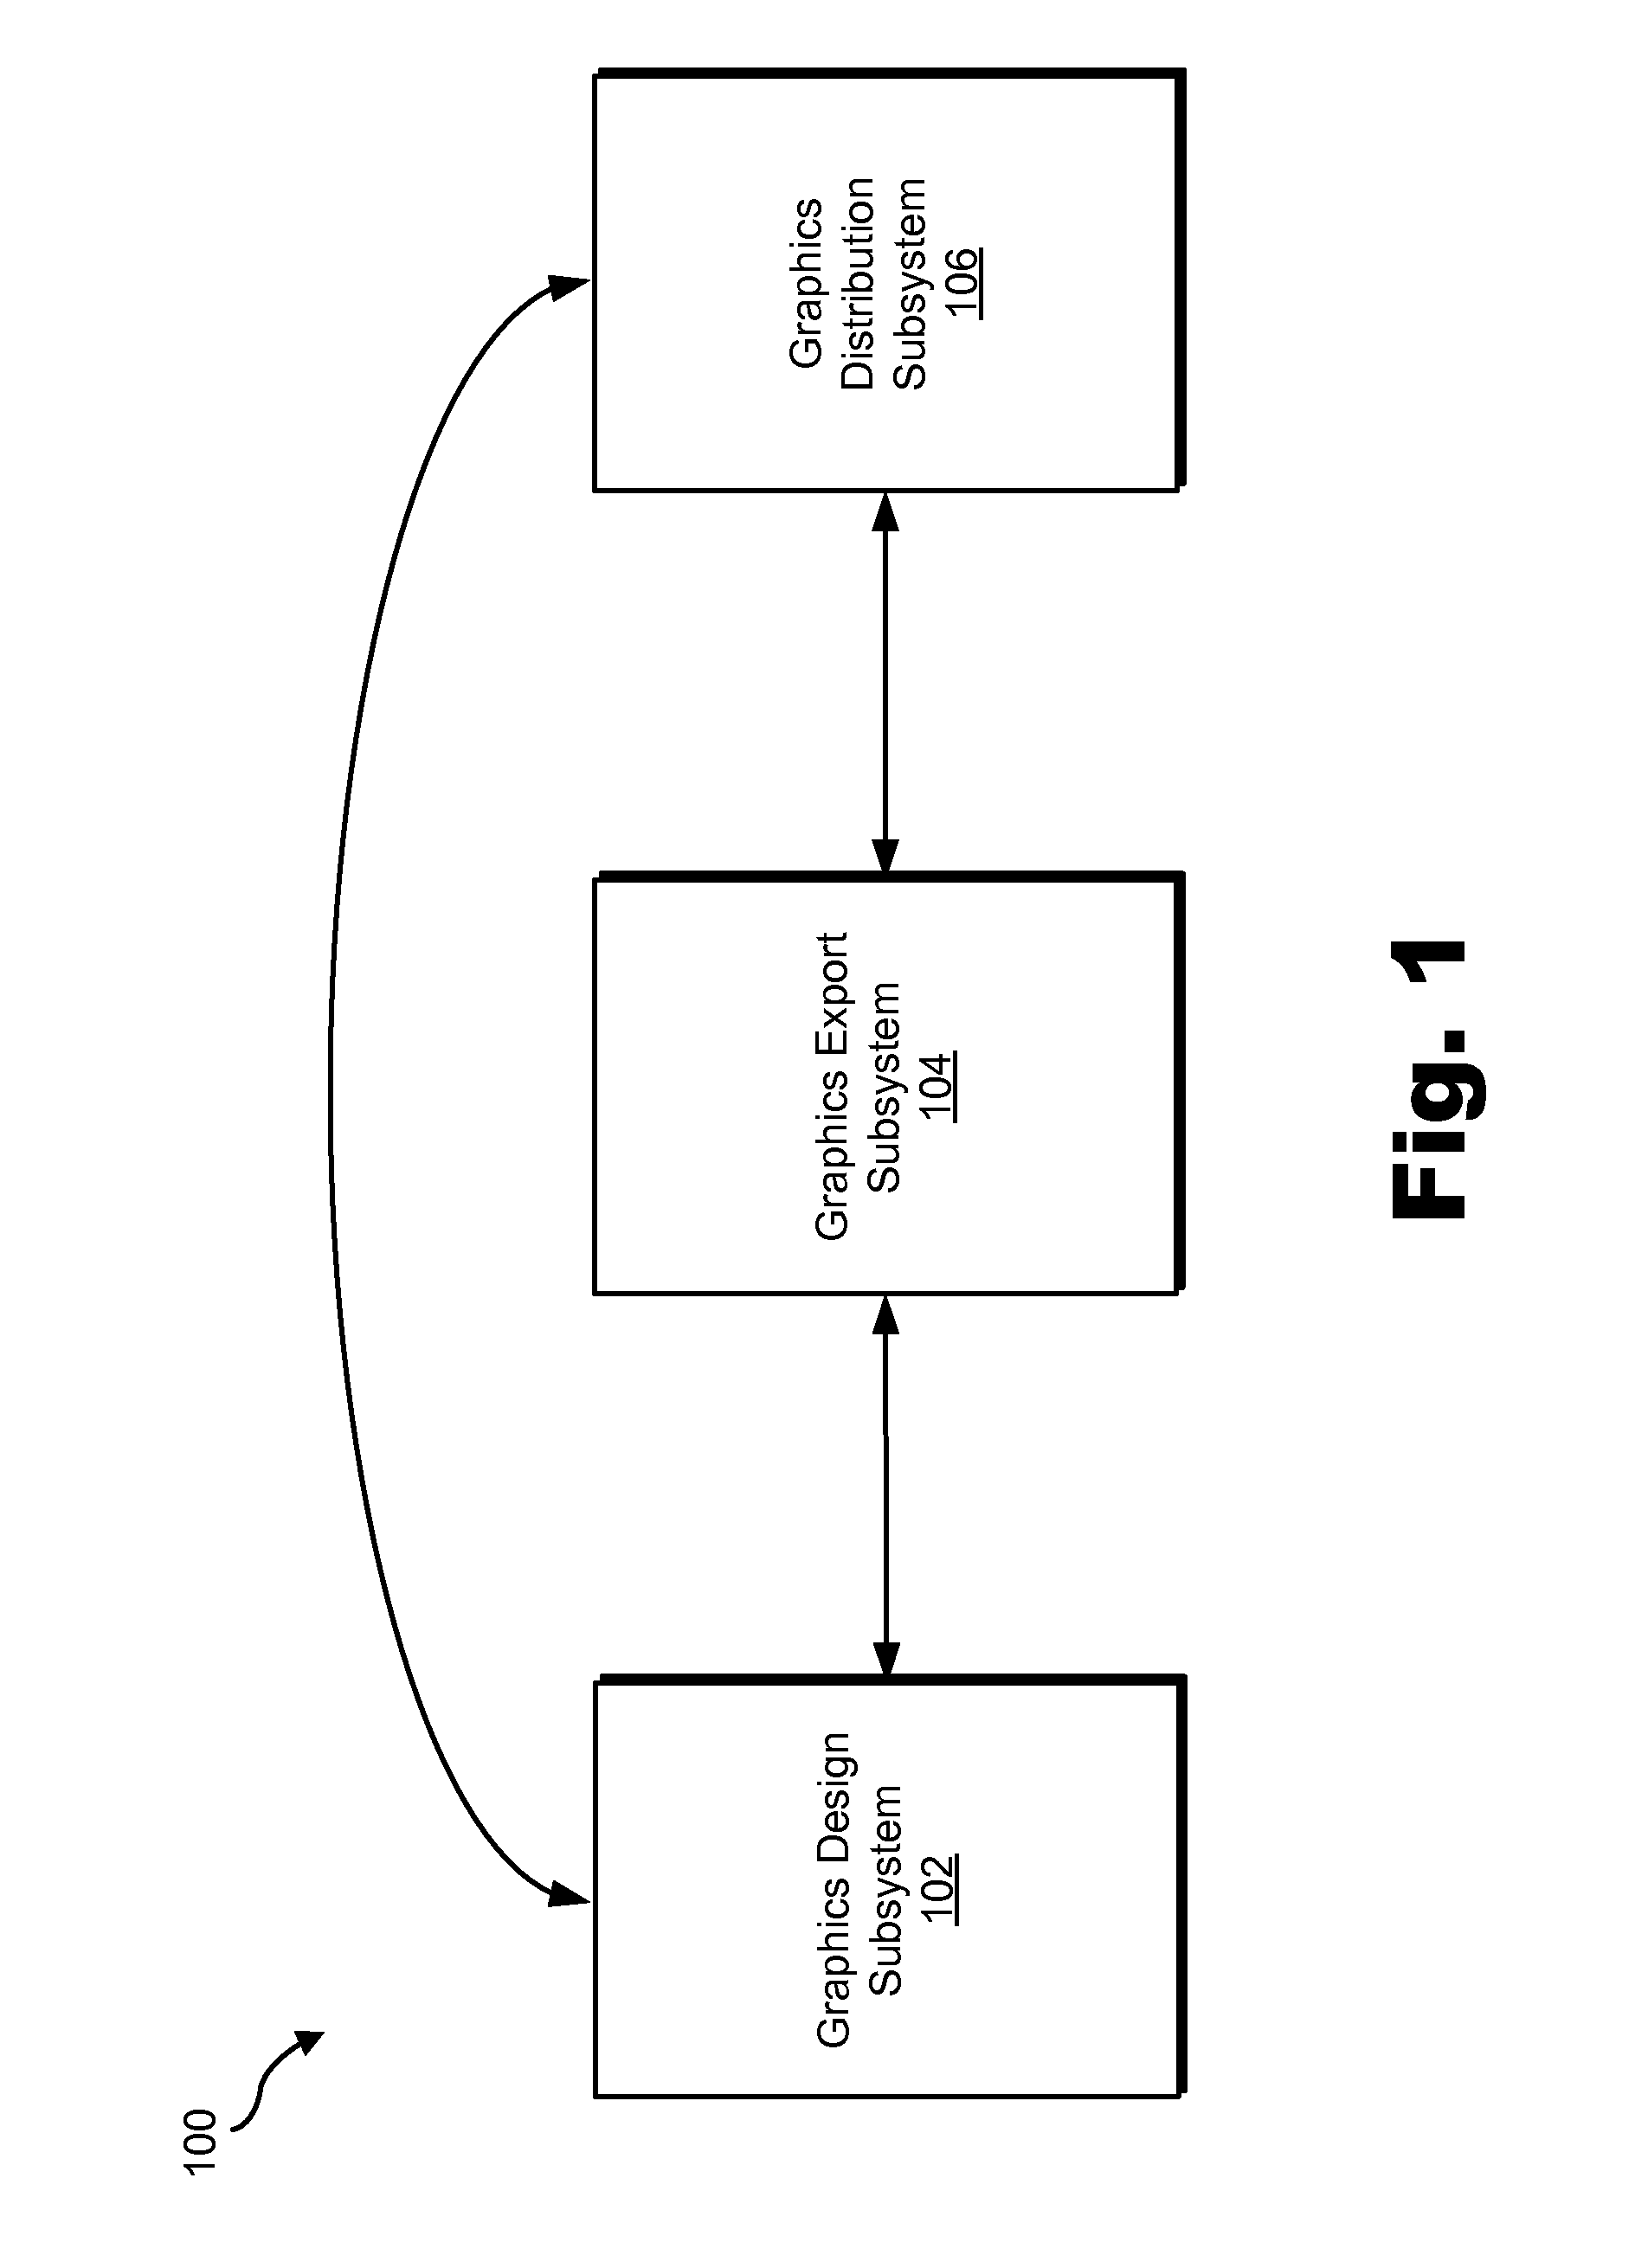 Building block based graphical user interface design and development systems and methods